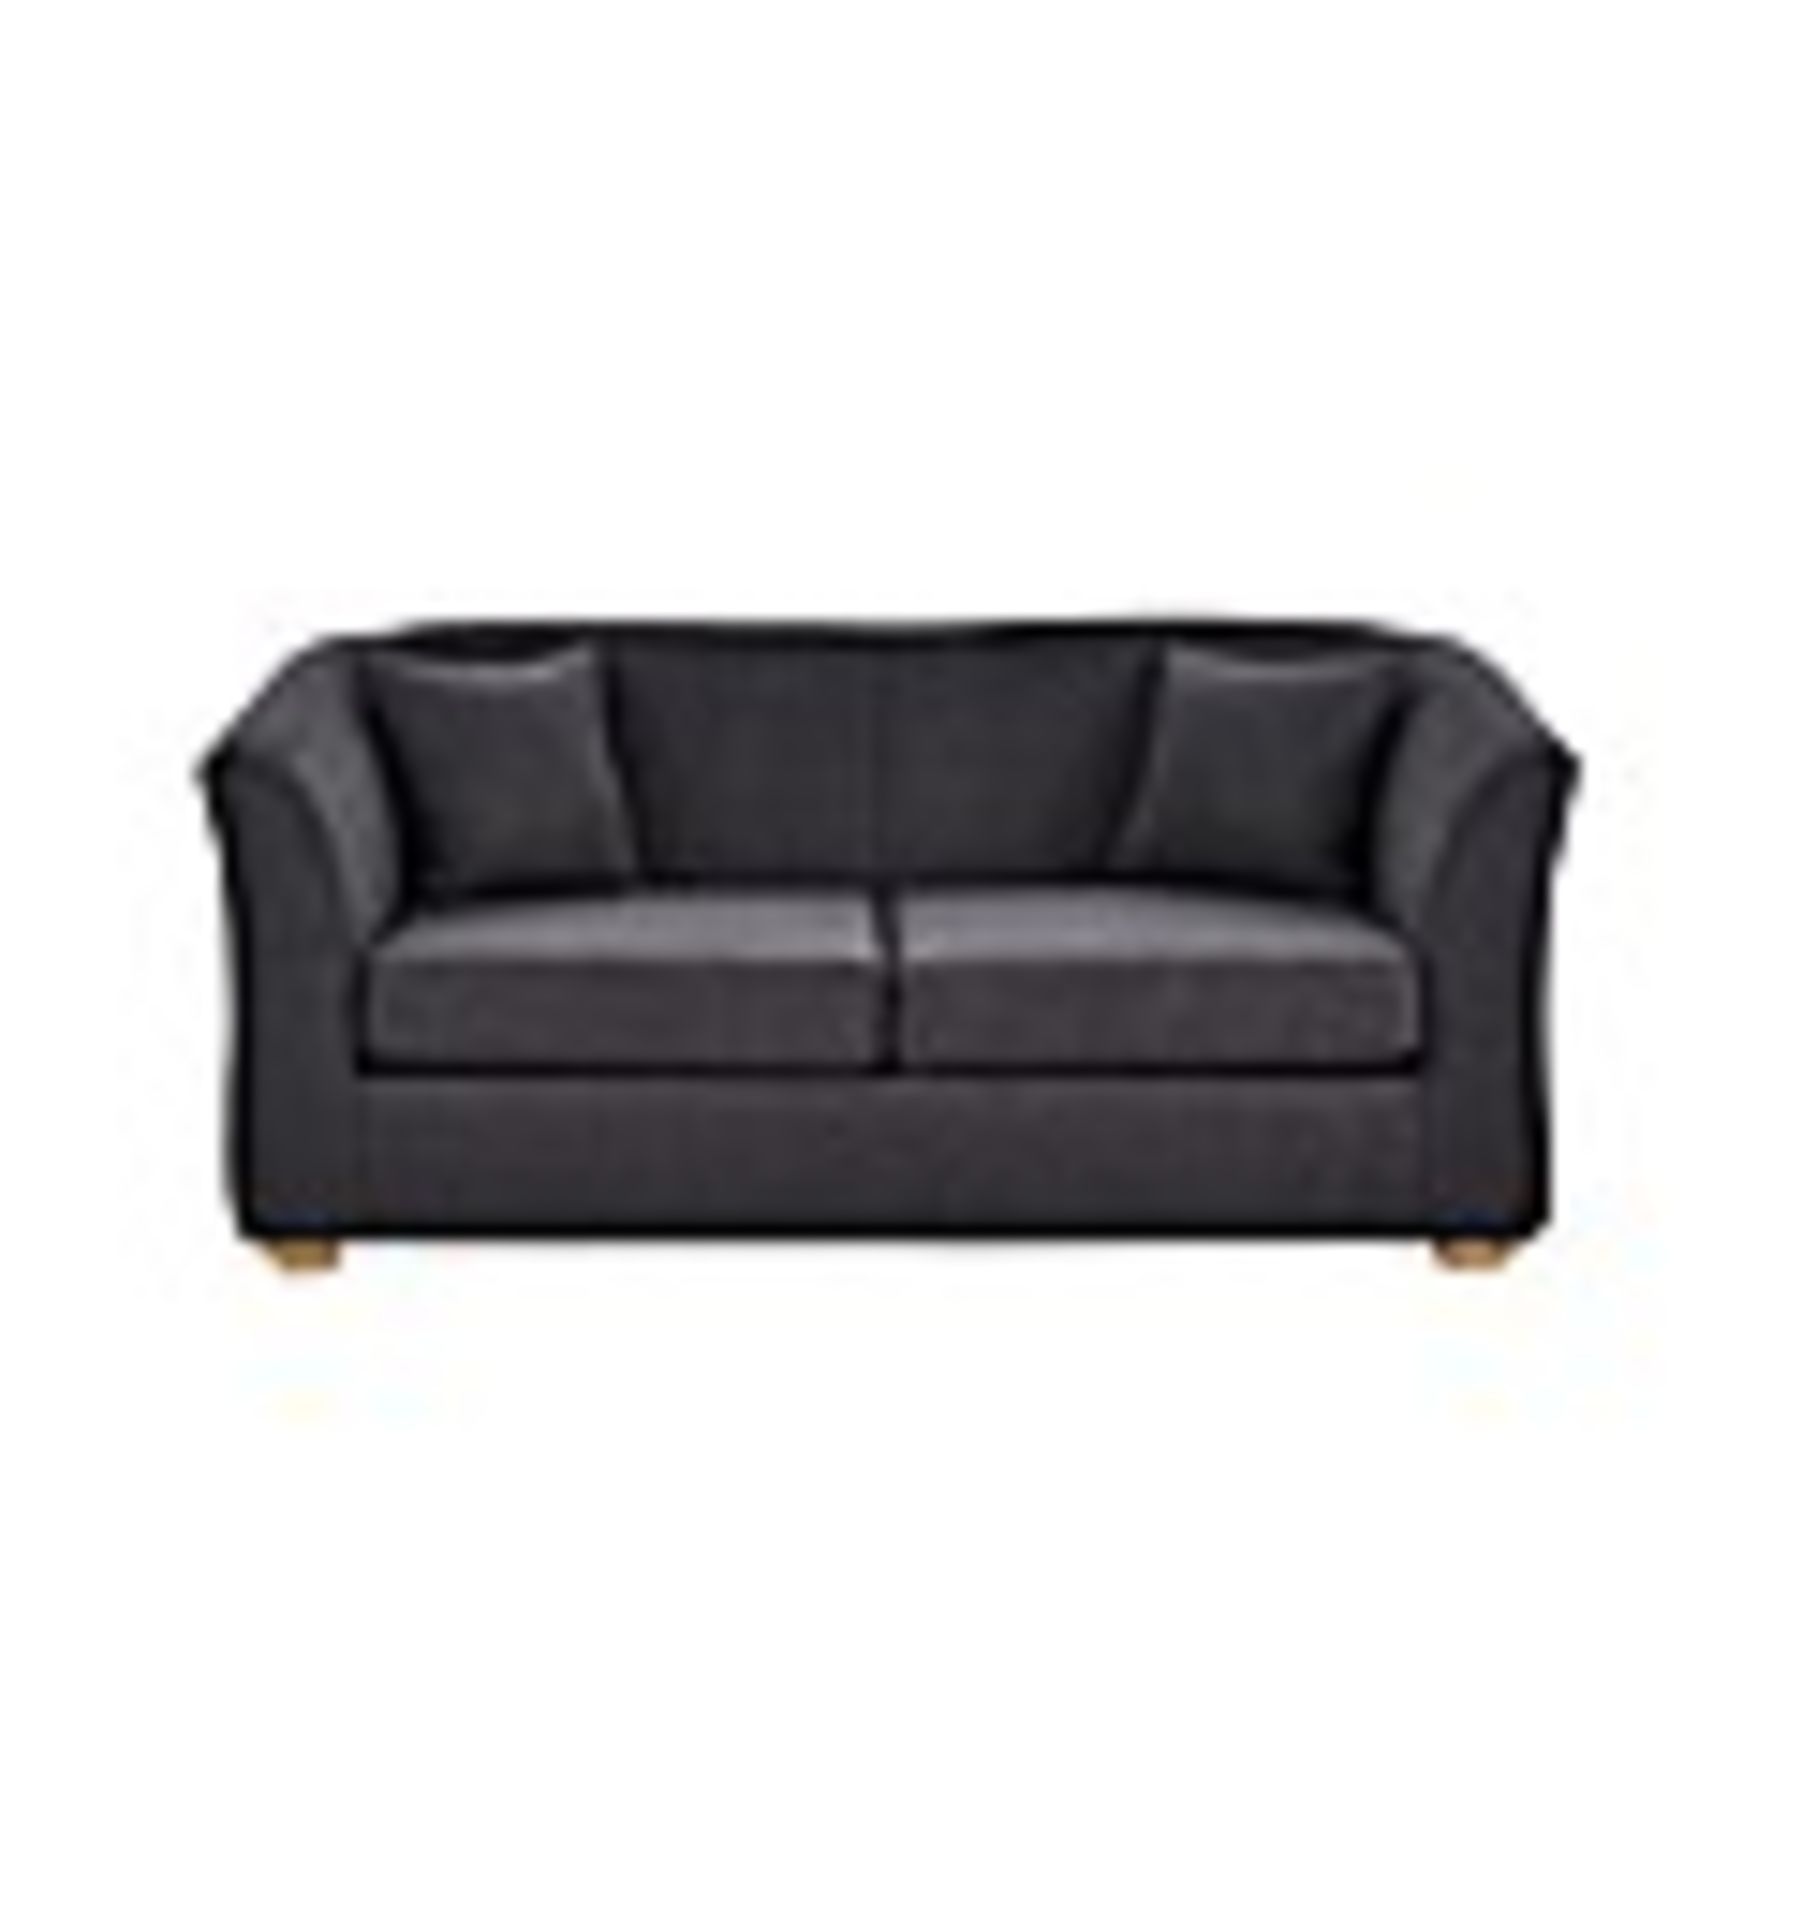 Malaga Sofabed. RRP £555.99.- SR4. *colour may vary from pics*